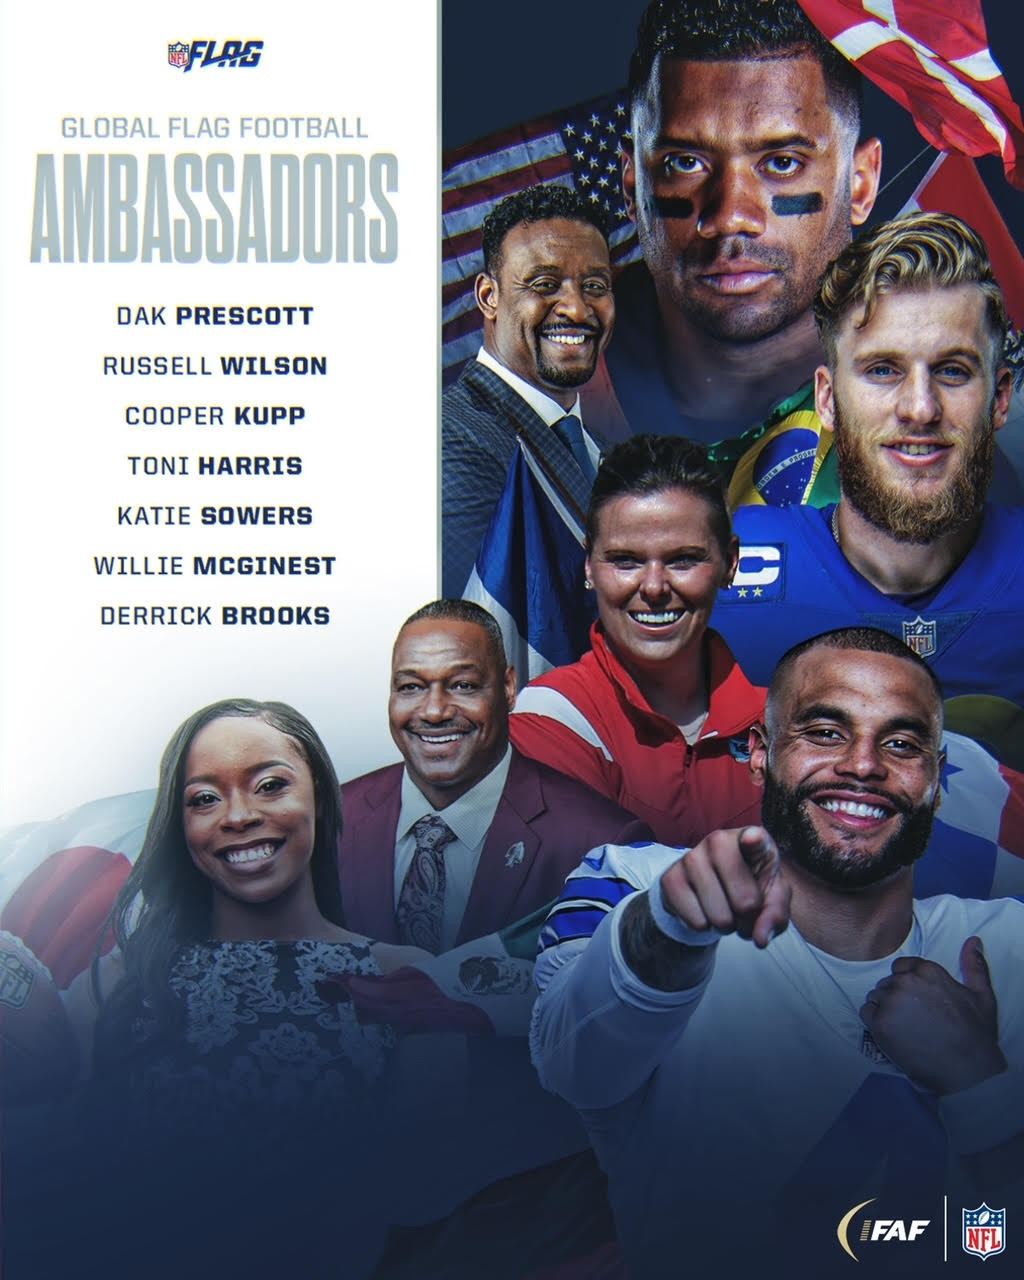 Seven former and present American football players and coaches have been named as the first global flag football ambassadors ©IFAF